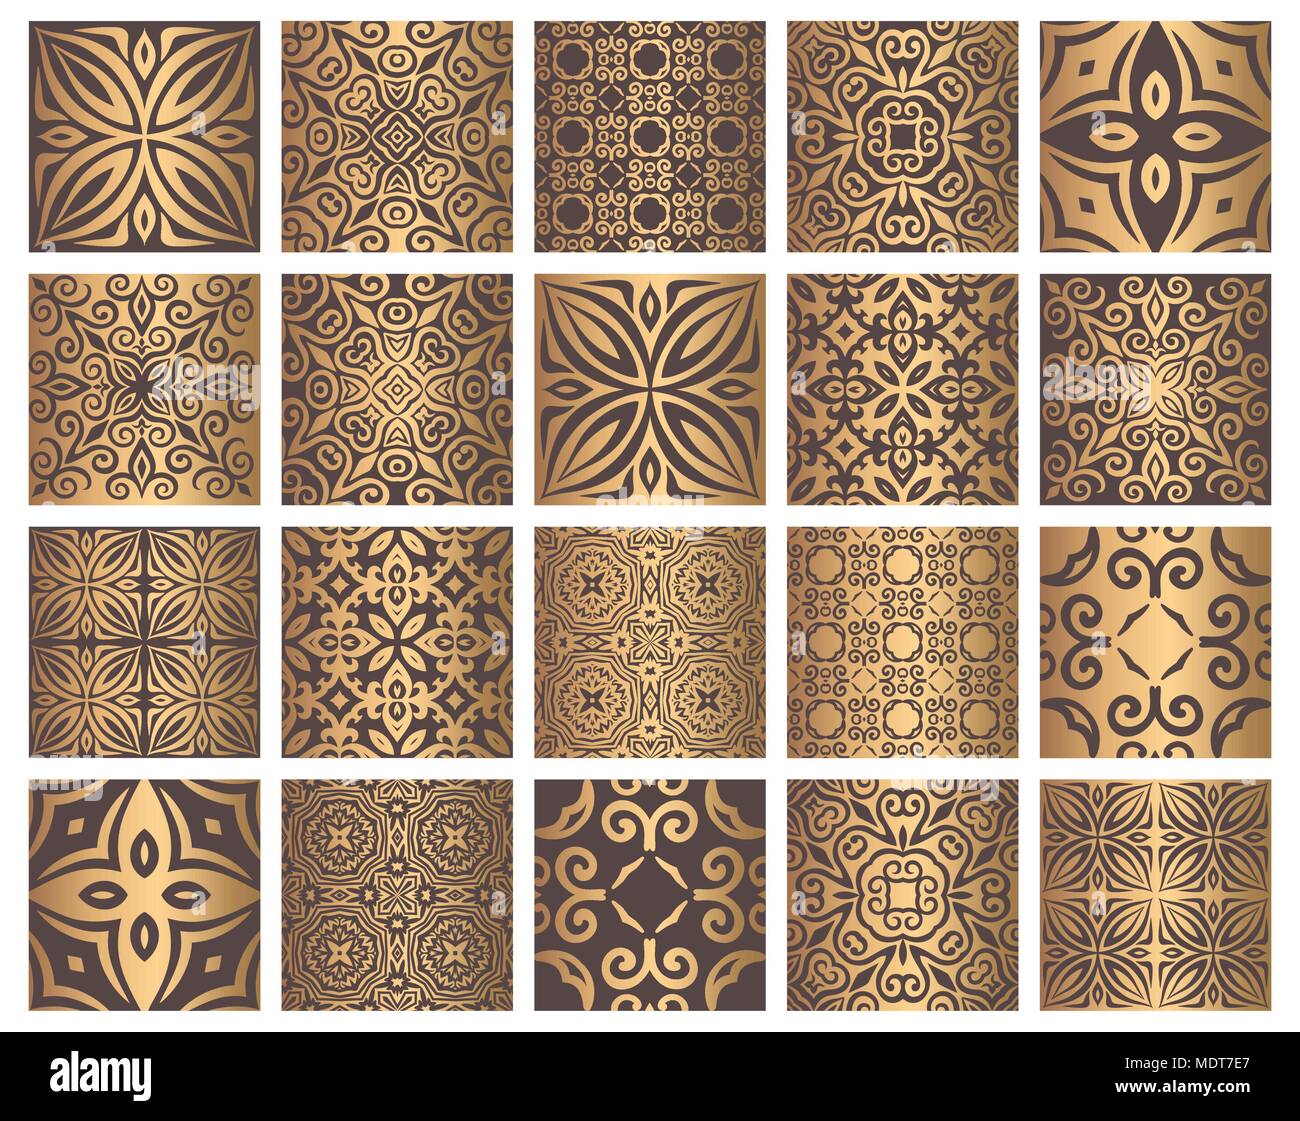 Vector Tiles Patterns Seamless Flourish Backgrounds With Golden